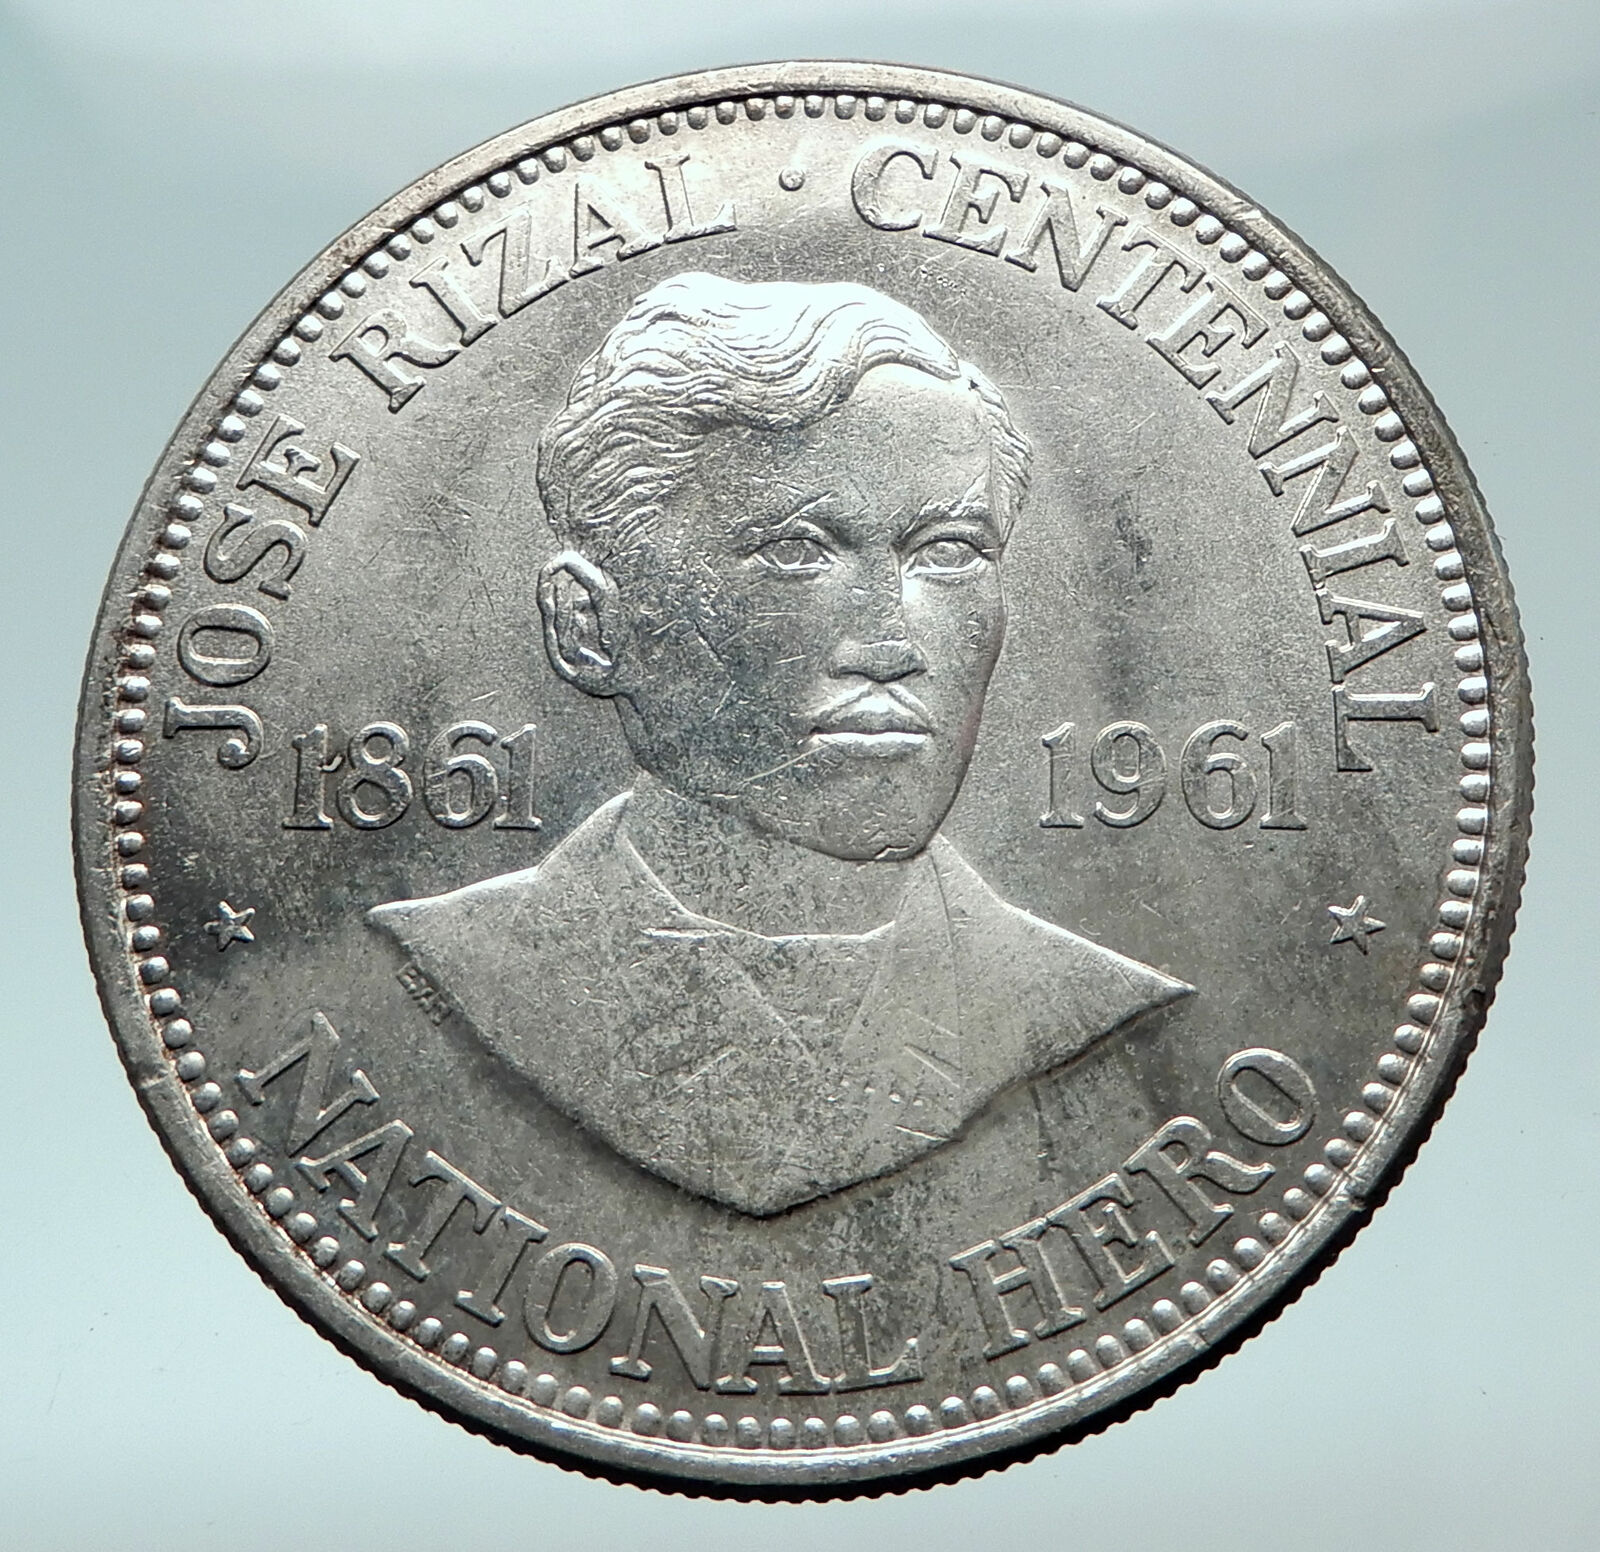 1961 PHILIPPINES with Jose Rizal Nationalist Antique Silver 1 Peso Coin i81496